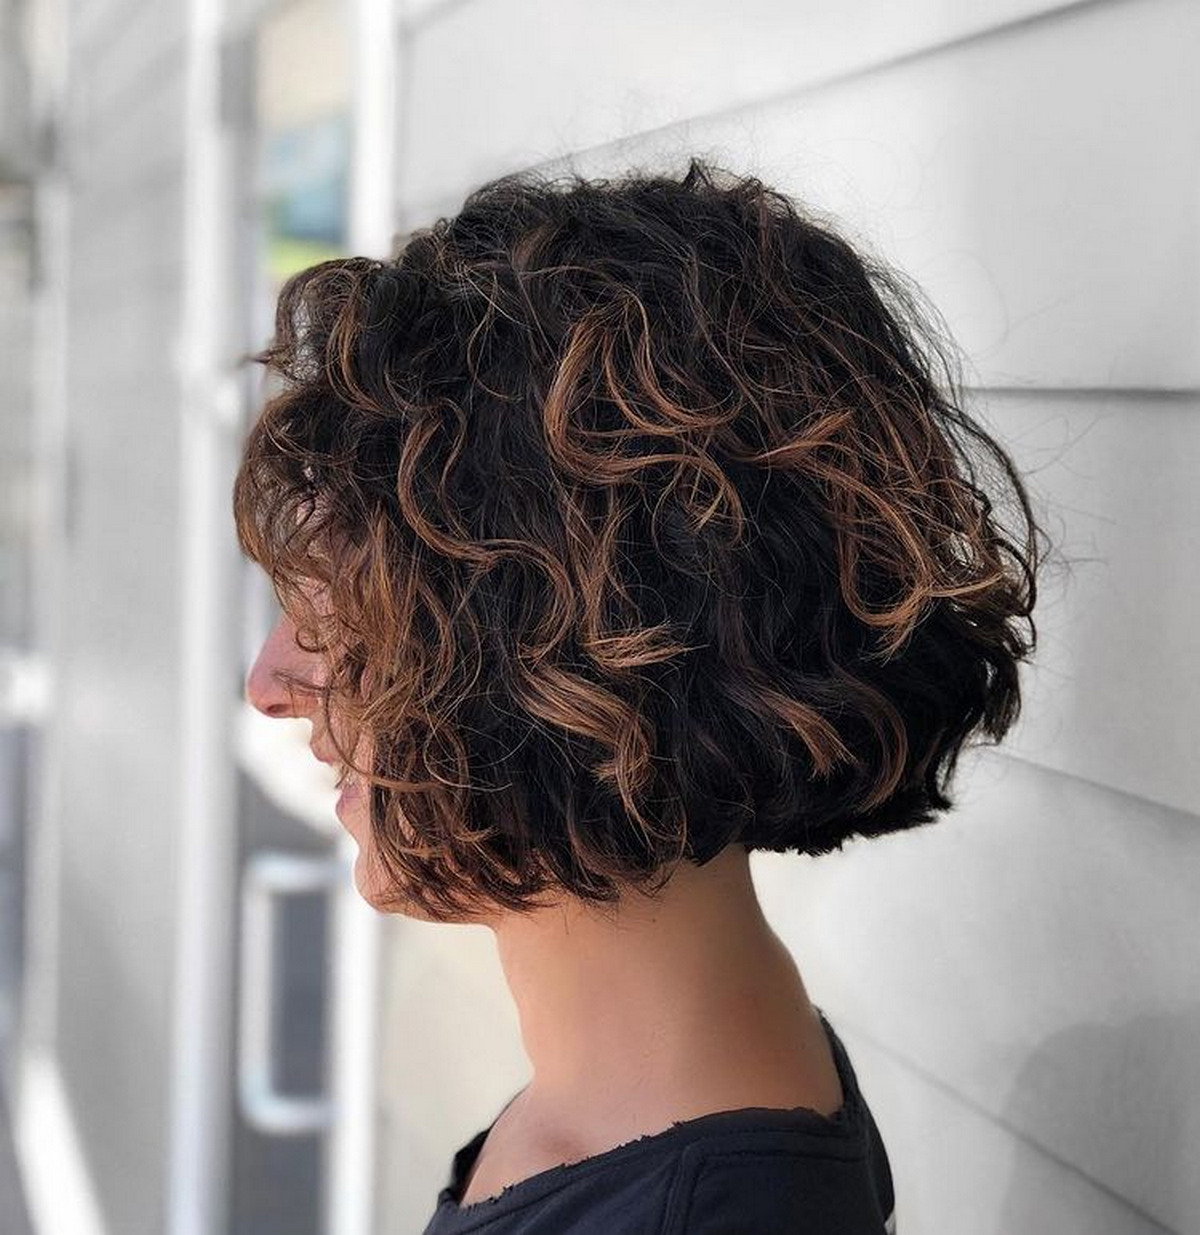 Jaw-Length Curly Bob With Caramel Highlights